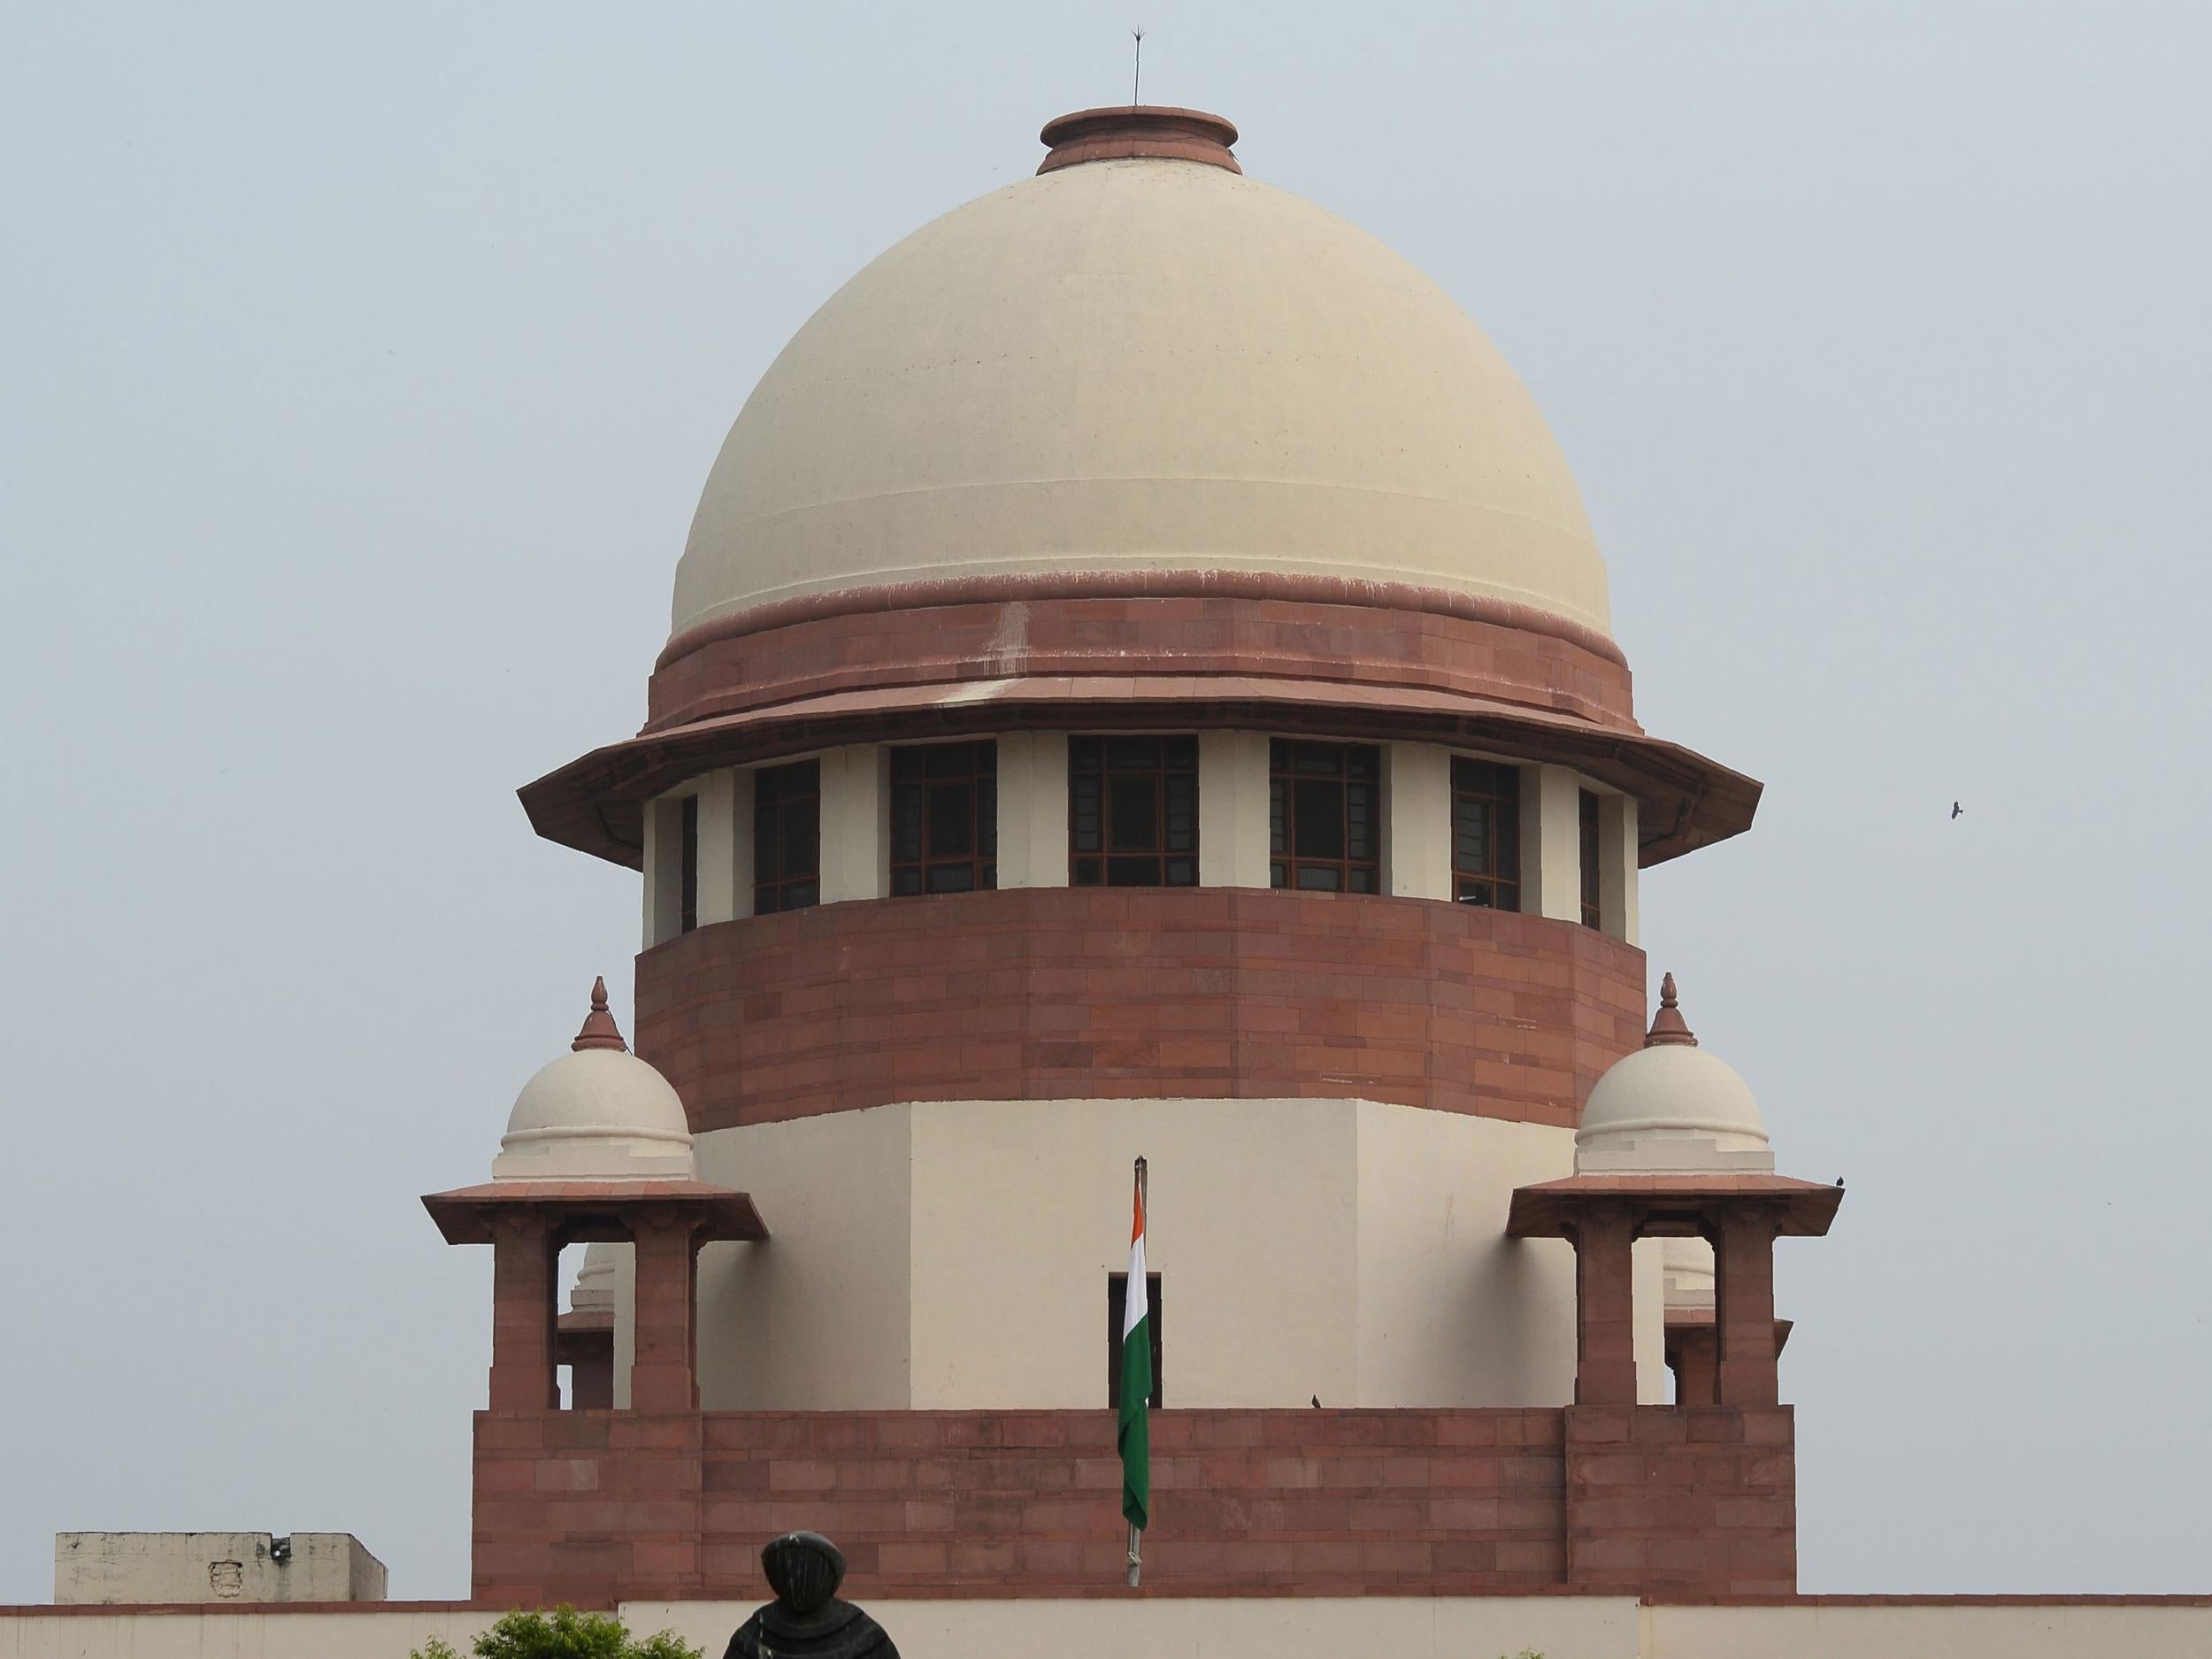 The Supreme Court of India in Delhi continues to hold hearings virtually, even as most other lockdown restrictions have eased